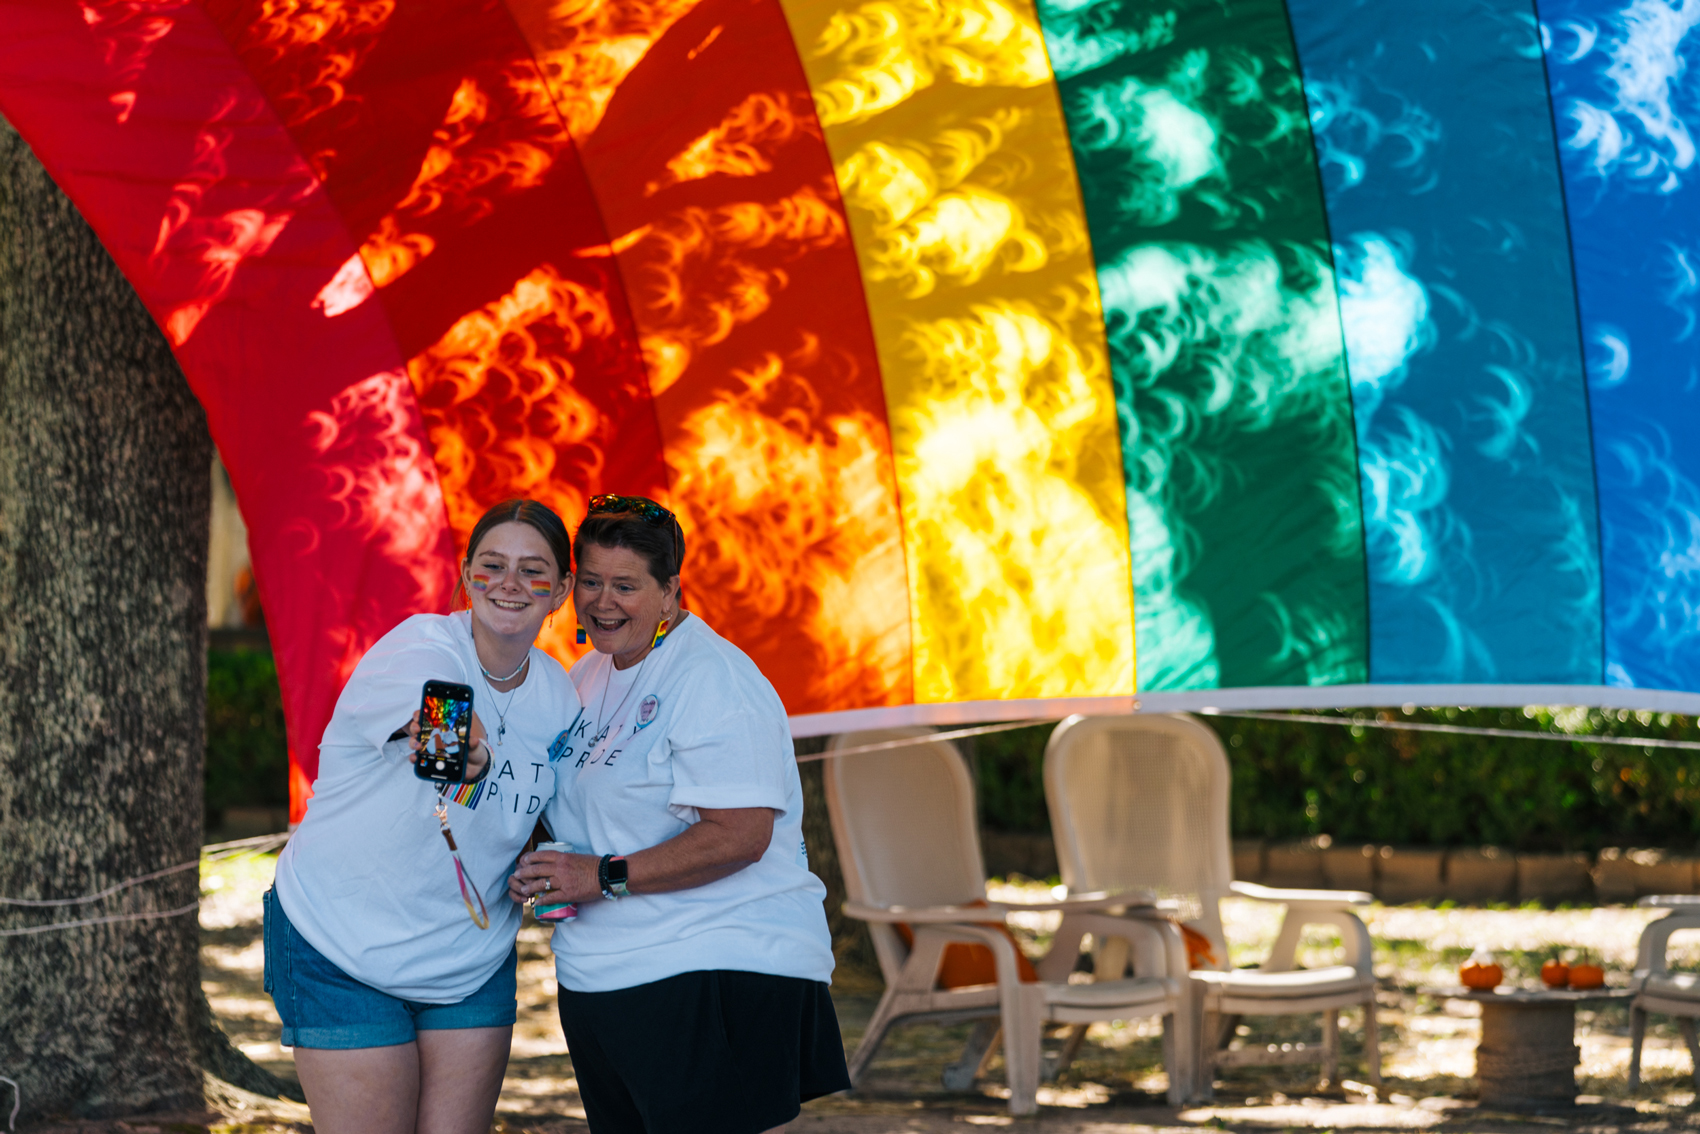 Festival attendees take a selfie with the solar eclipse as the small arches in the light filtering through tree leaves and falling onto the giant Pride flag during Katy Pride festival at First Christian Church on Saturday, Oct. 14, 2023, in Katy.